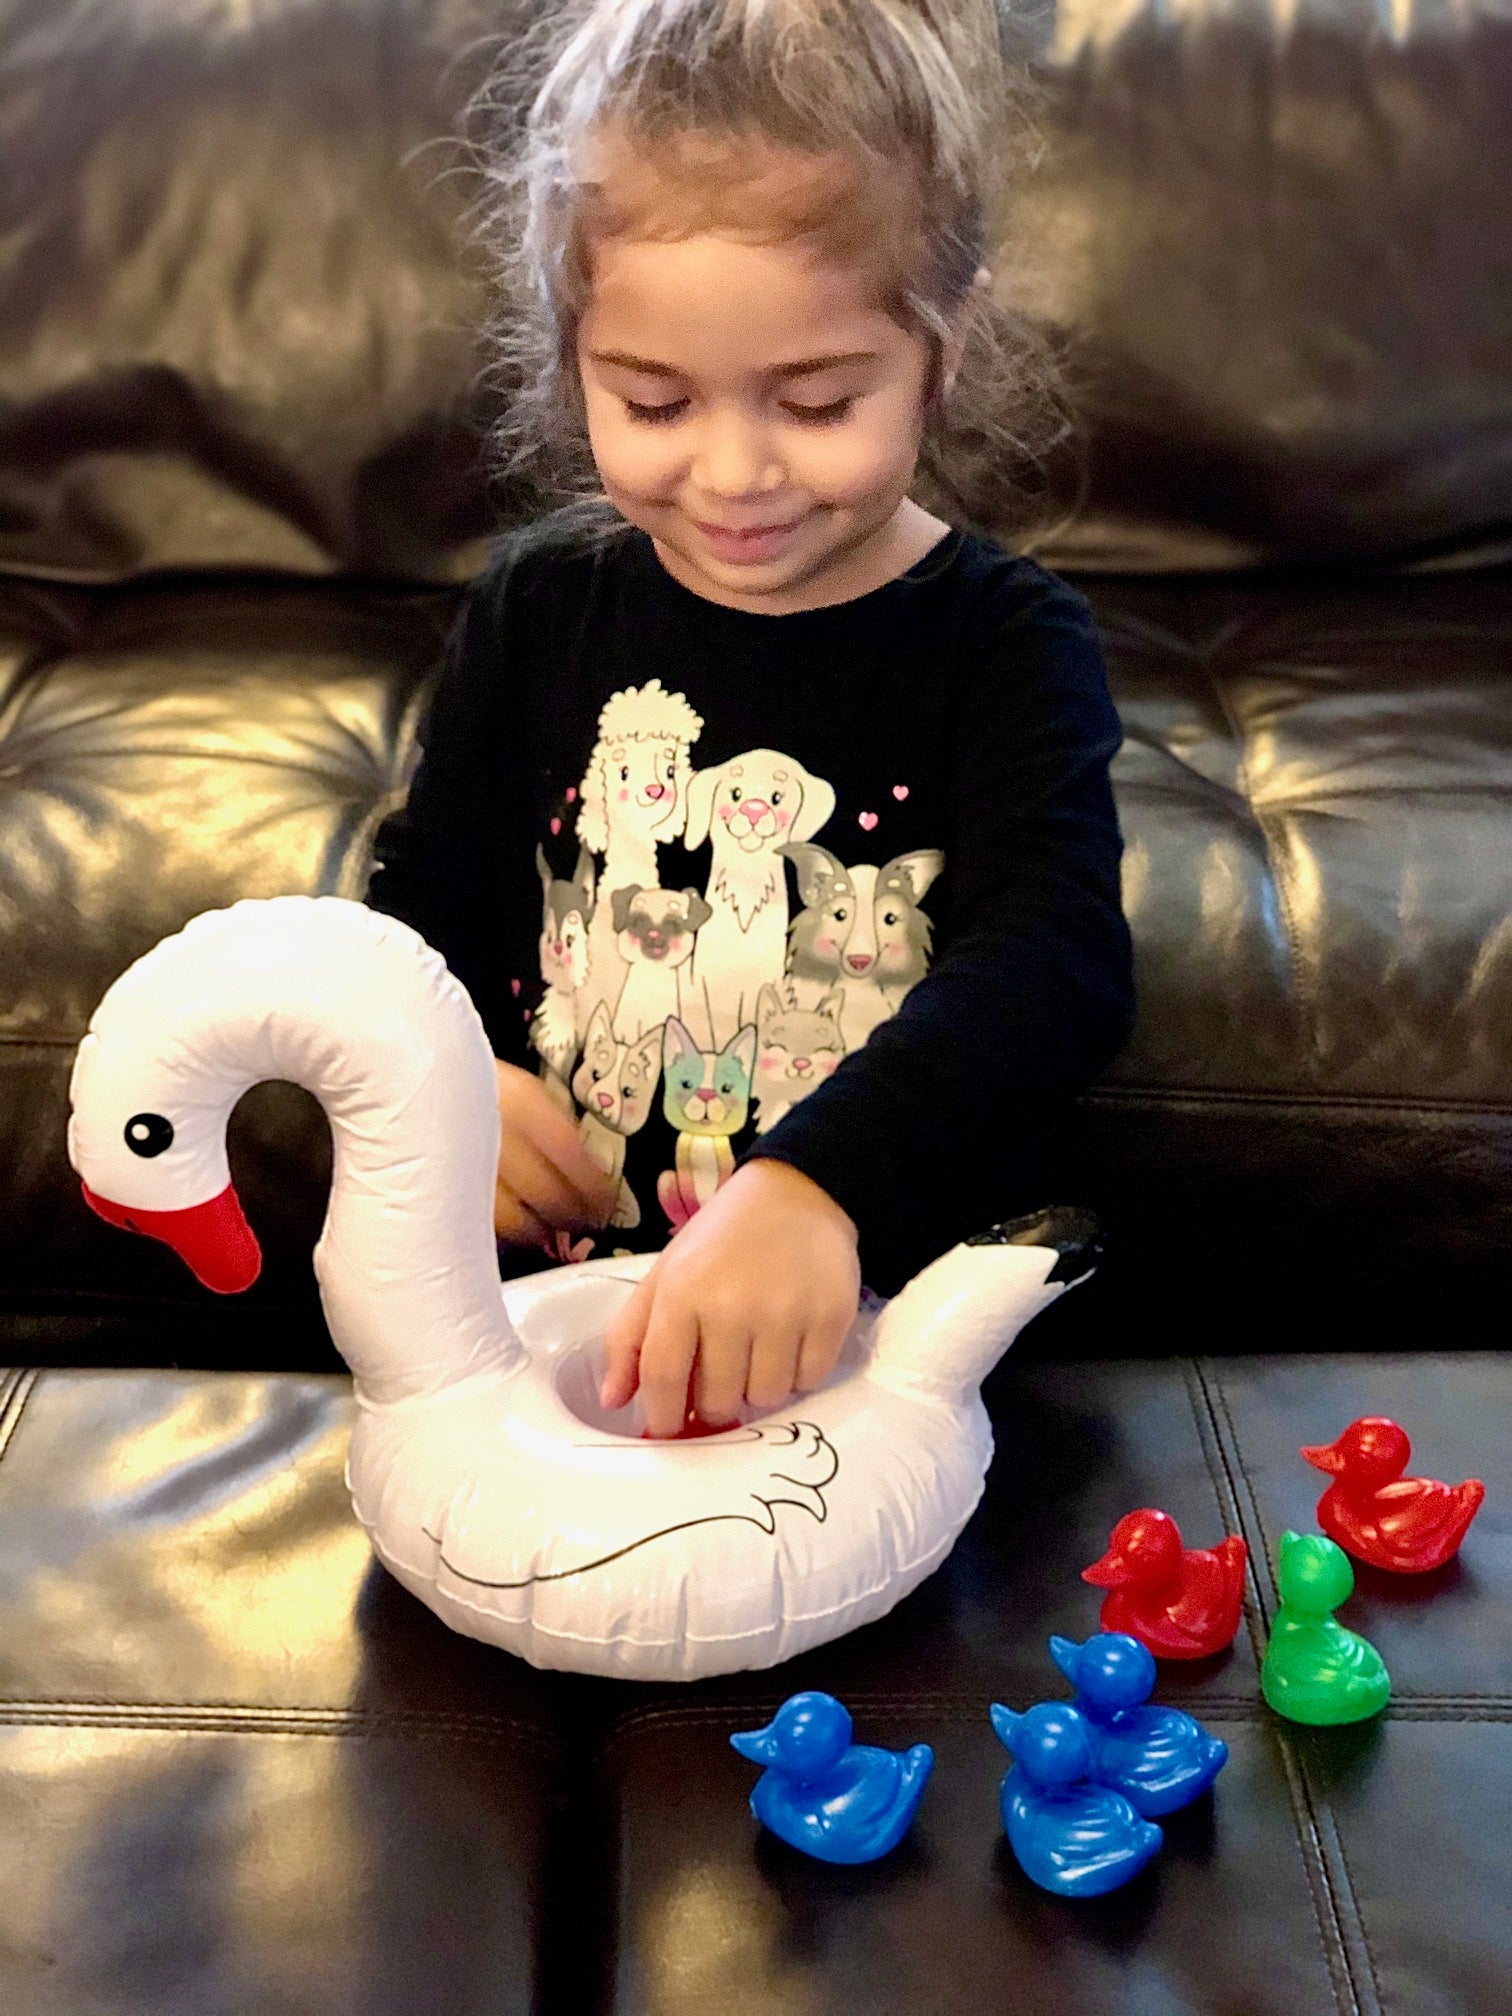 Inflatable swan toy and babies games for kids